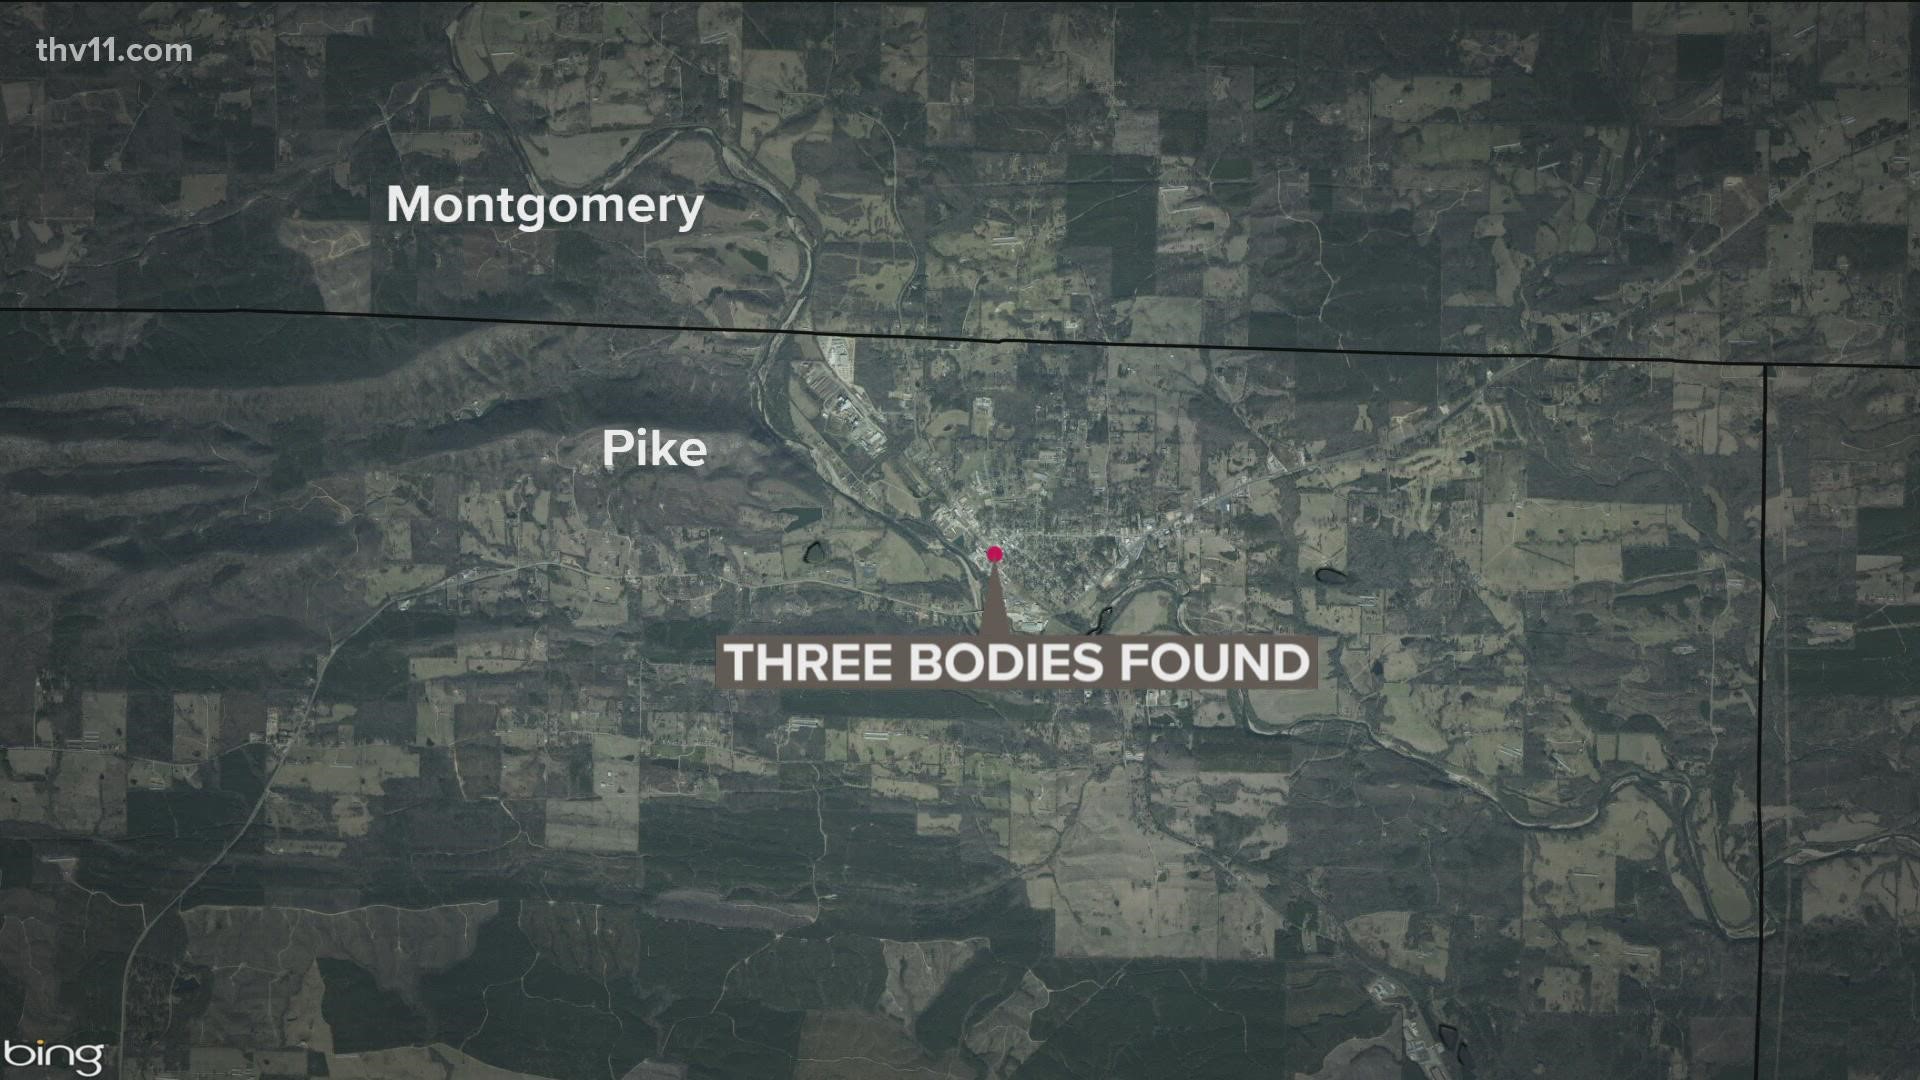 We're working to learn more about what led to the deaths of a family in Pike County over the weekend.